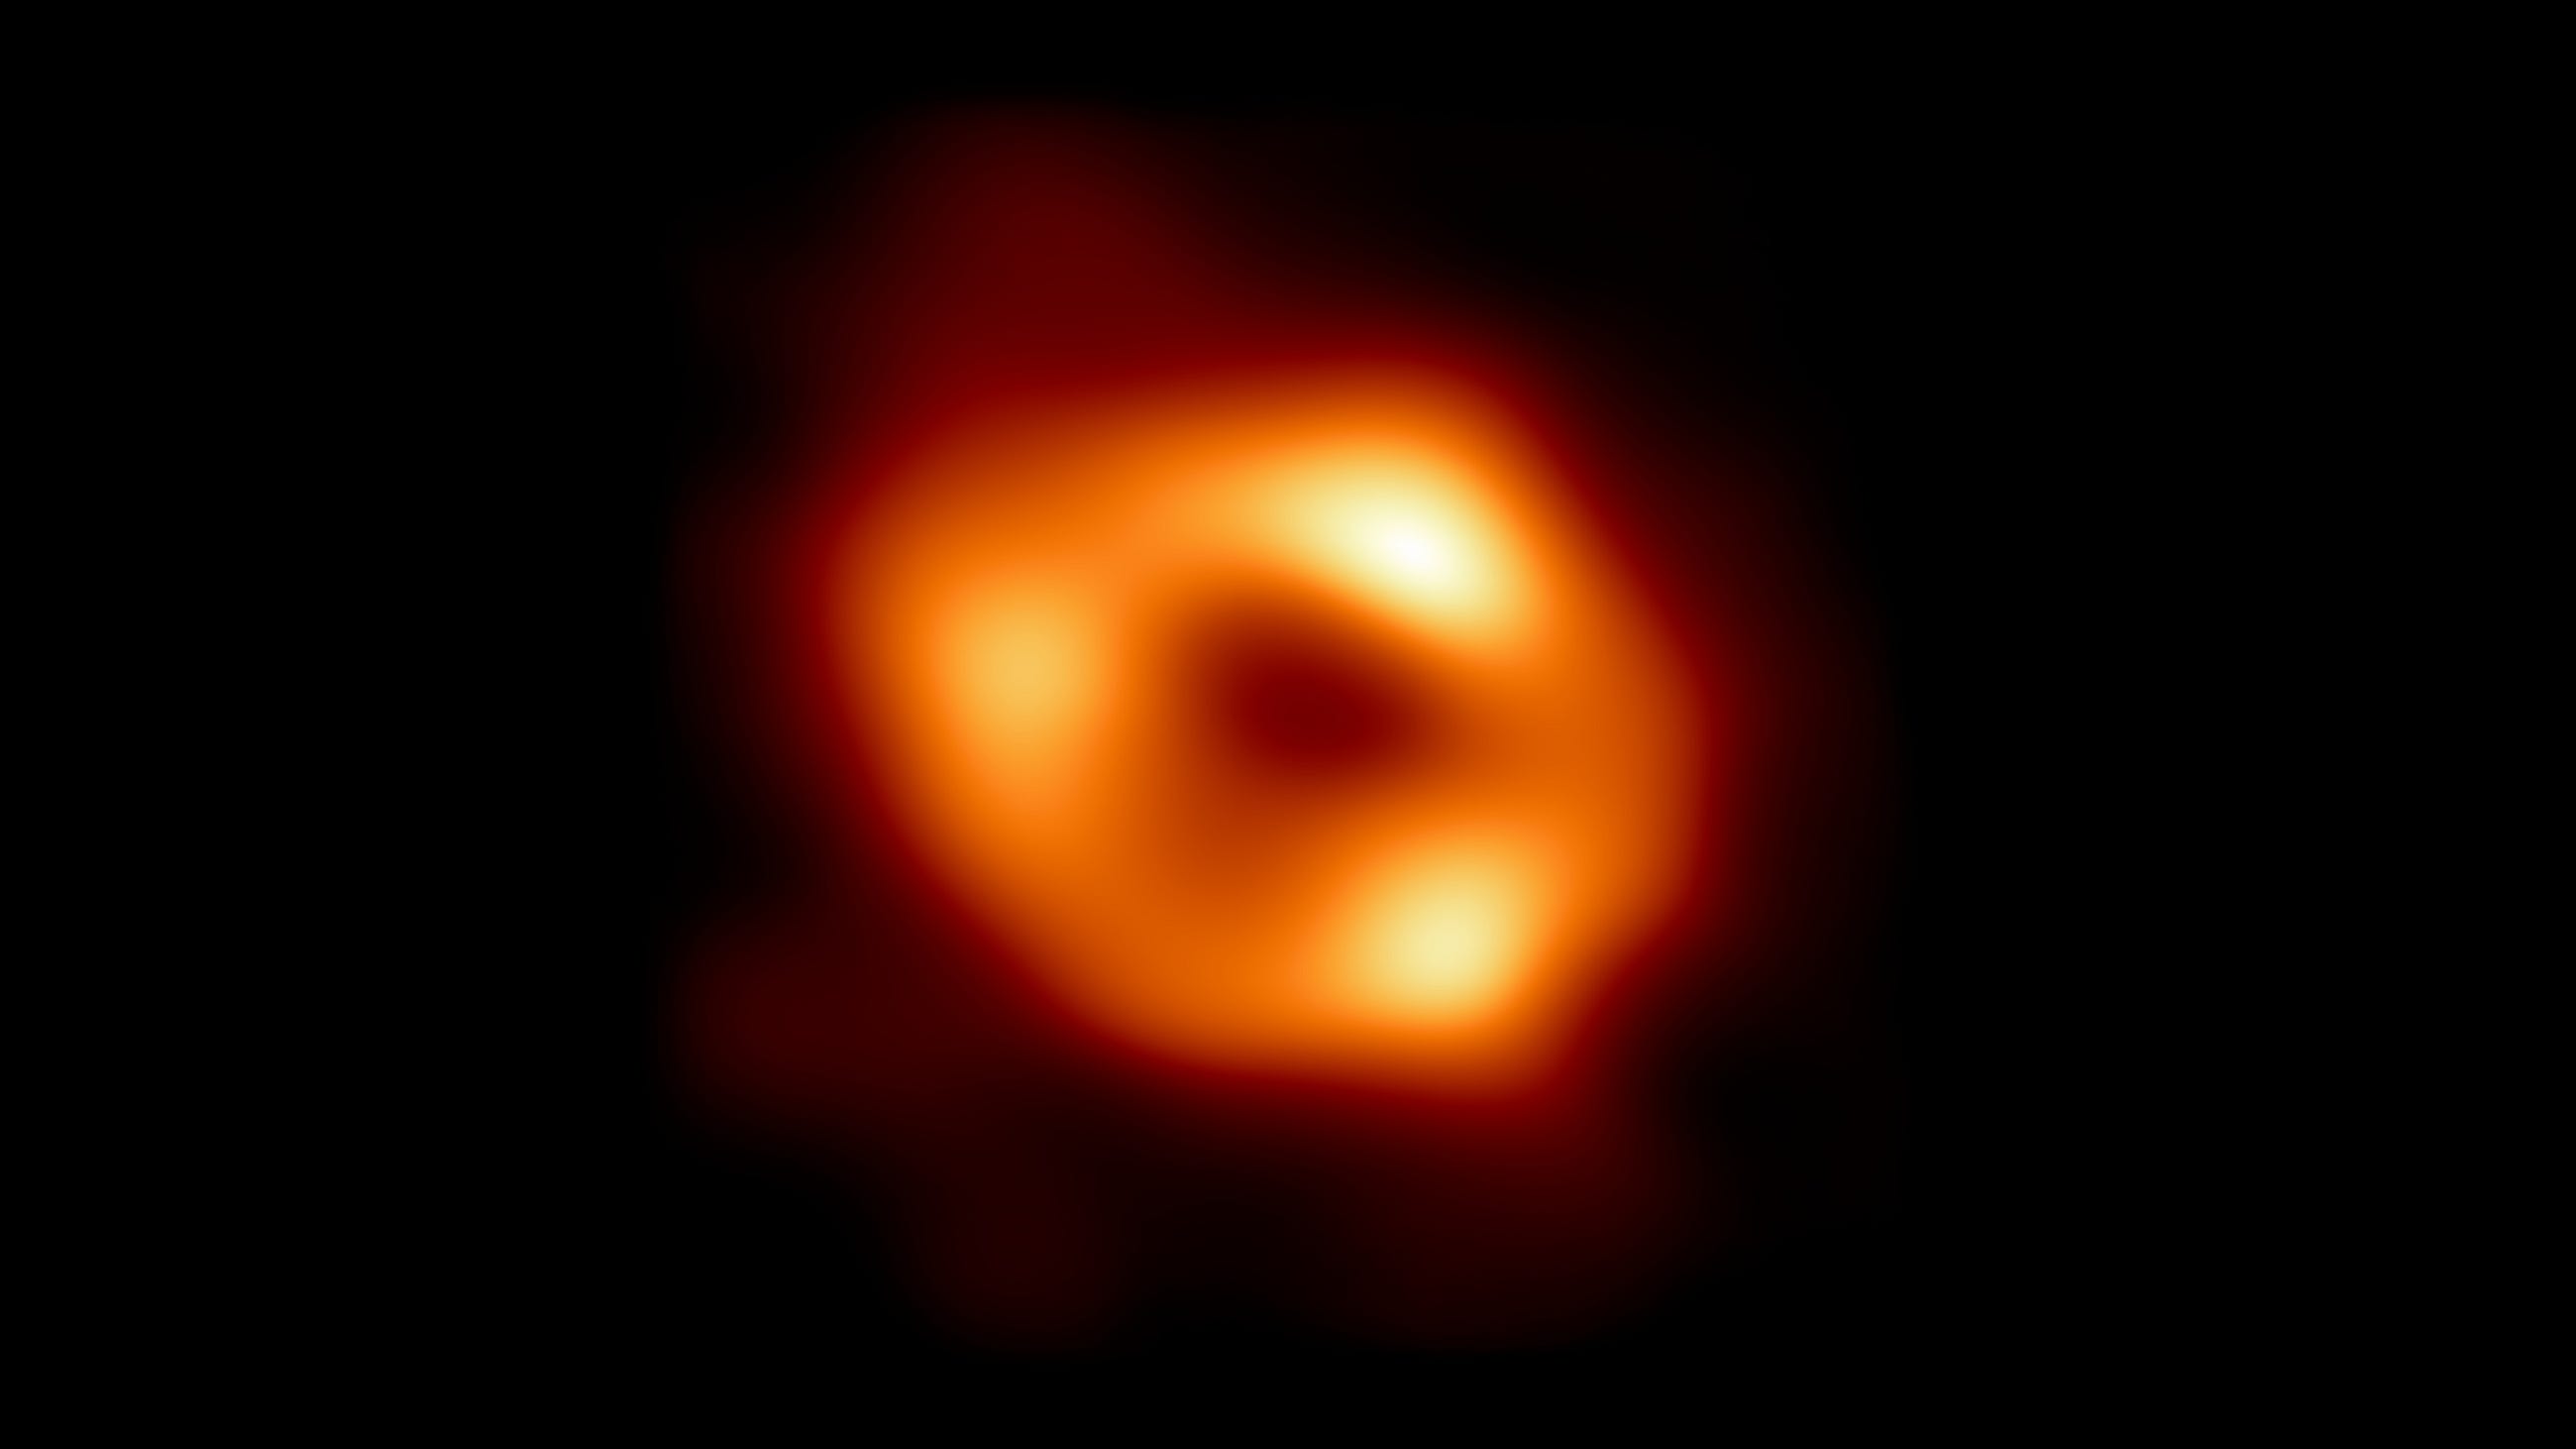 Researchers Just Released the First Image of the Supermassive Black Ho